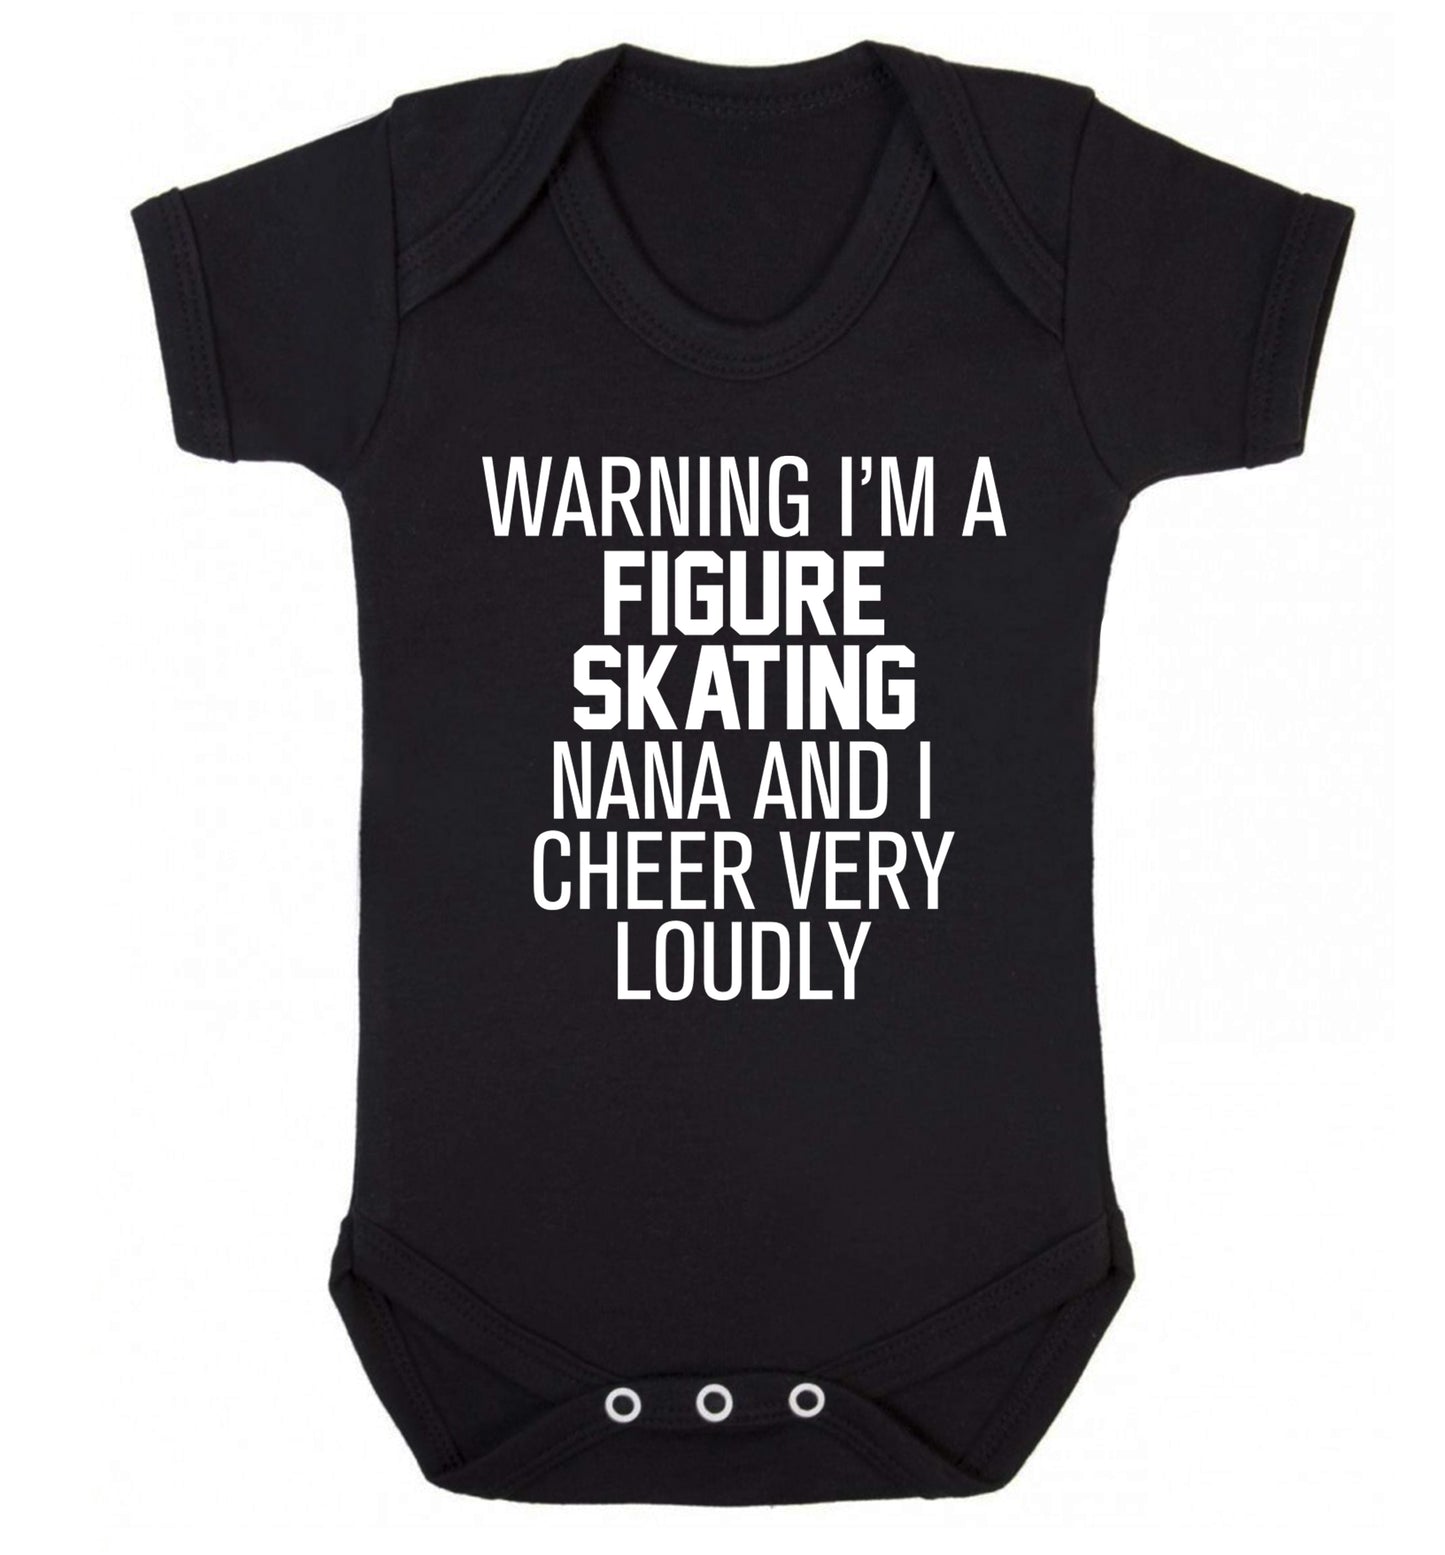 Warning I'm a figure skating nana and I cheer very loudly Baby Vest black 18-24 months